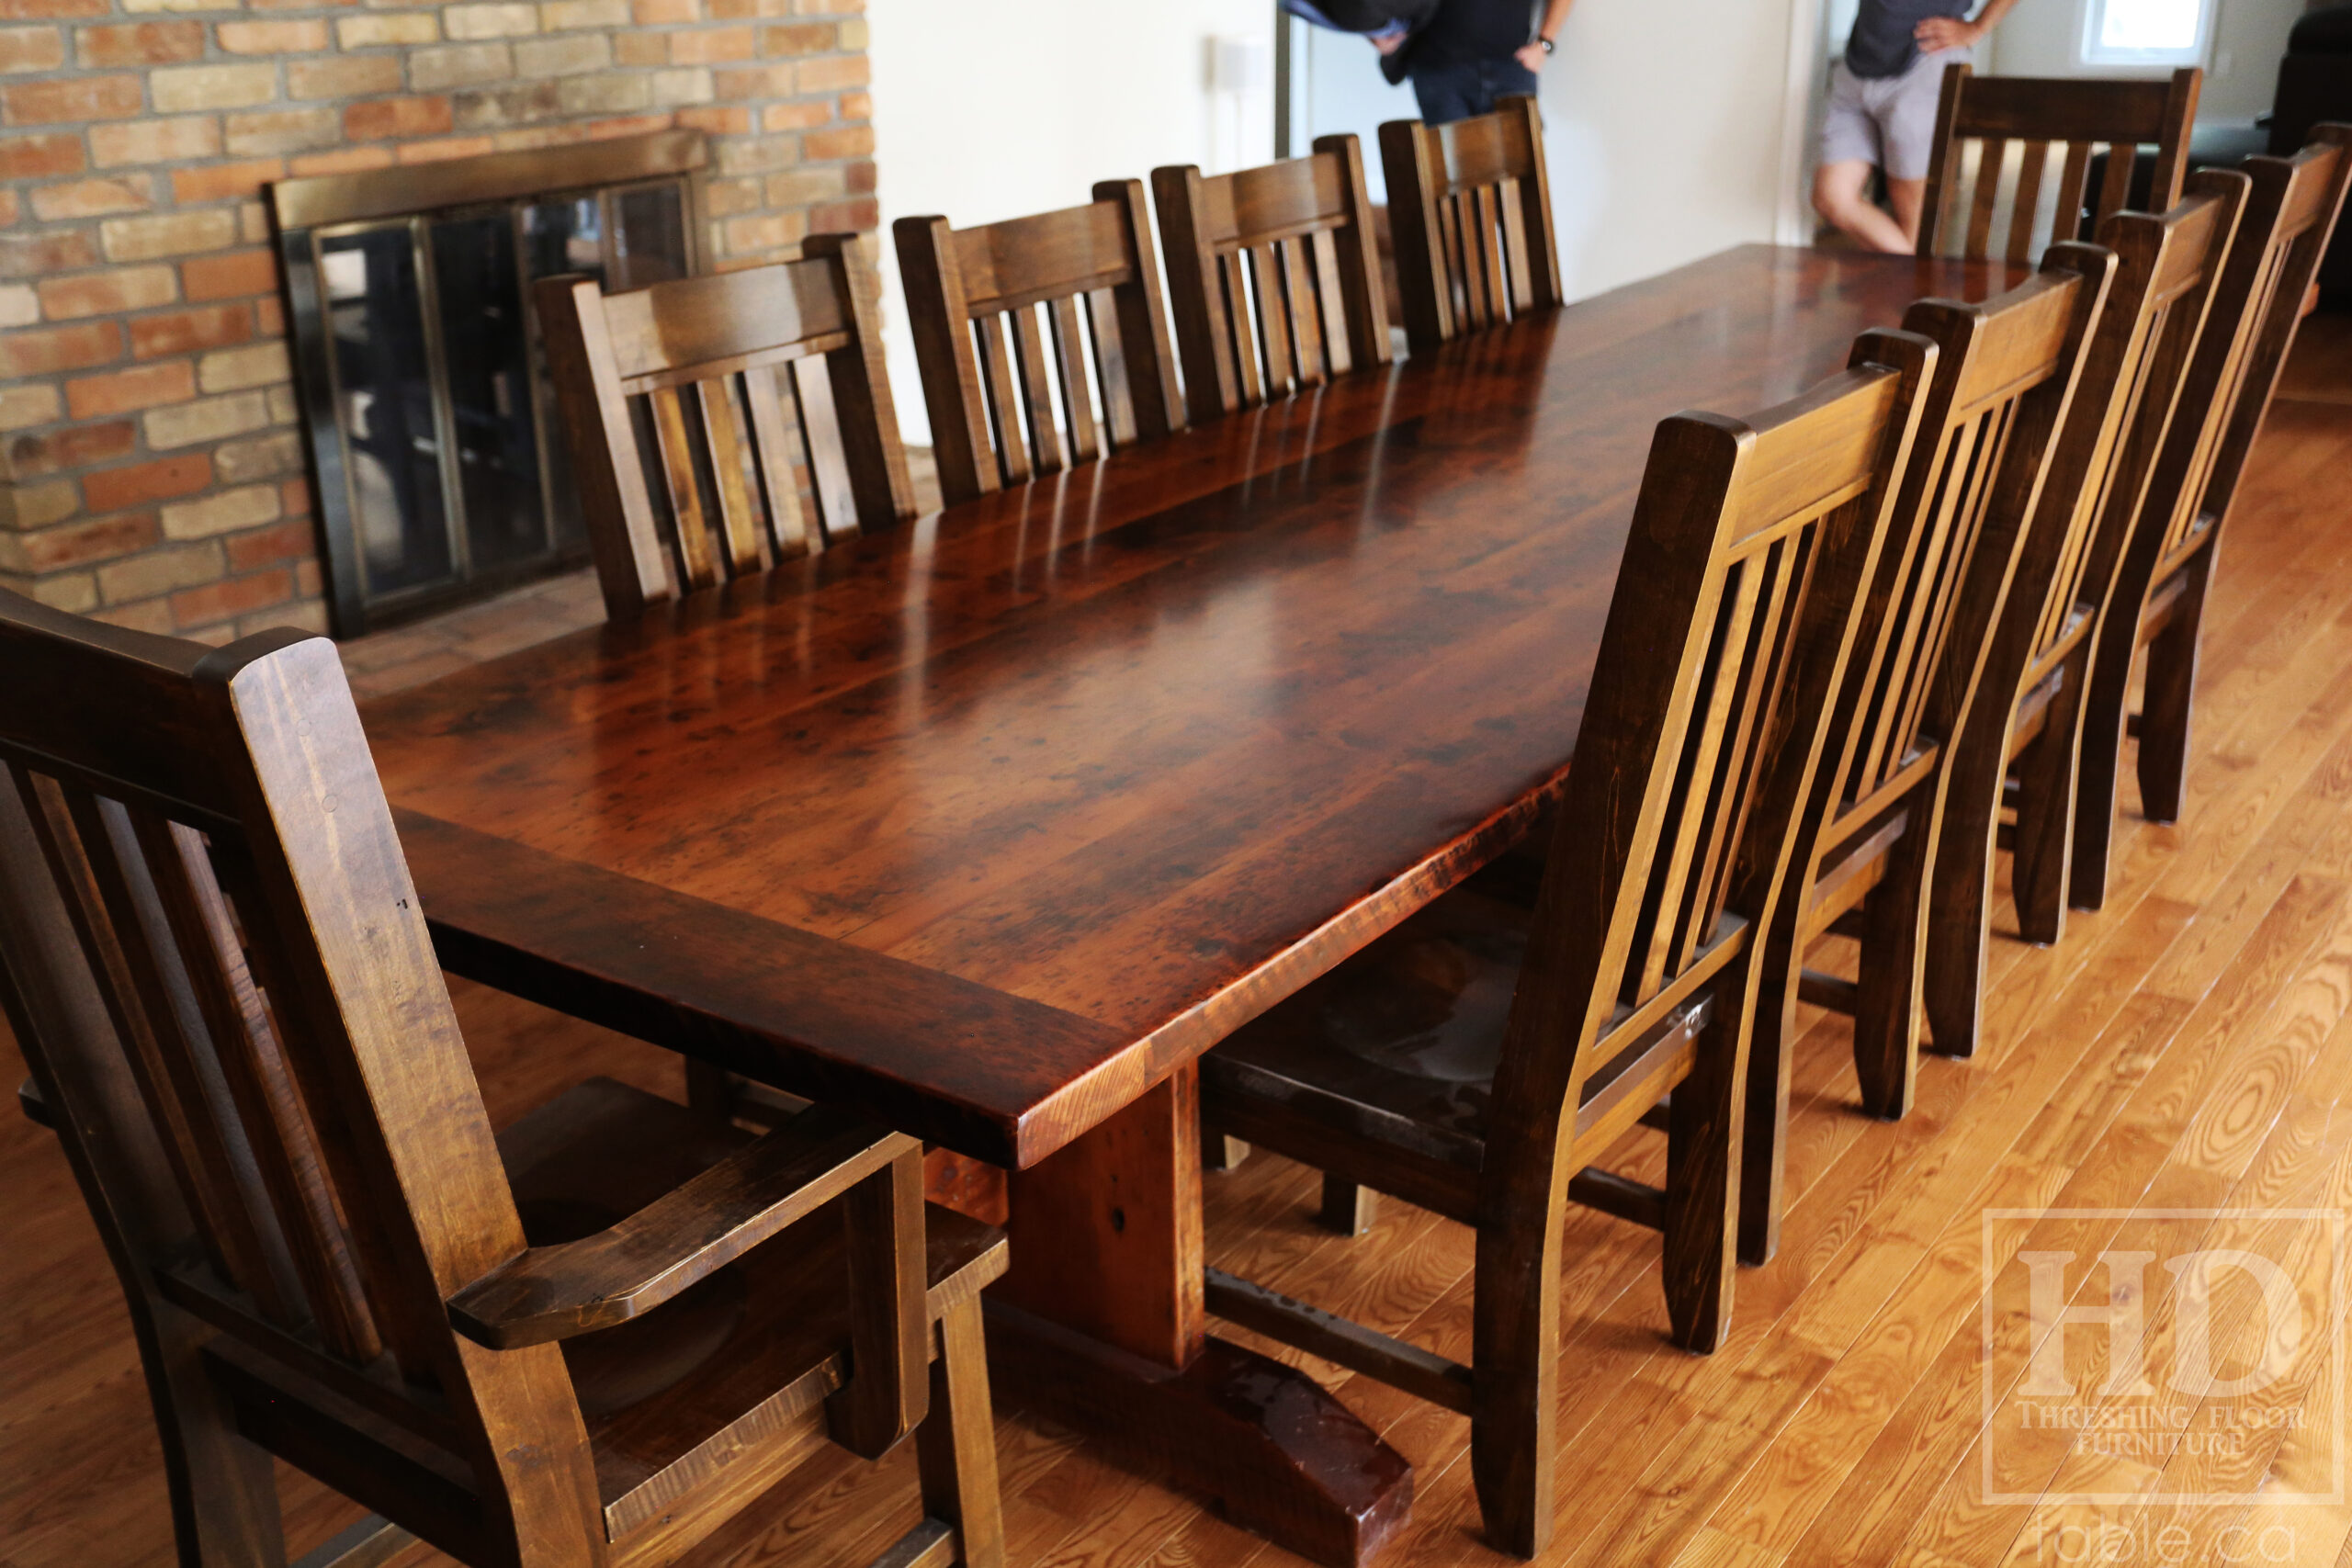 Project Summary: 12’ Reclaimed Ontario Barnwood Table we made for a Goodwood, Ontario home – 42” wide – Trestle Base - Old Growth Hemlock Threshing Floor Construction - Original edges & distressing maintained – Bread Edge Boards - Premium epoxy + satin polyurethane finish – 10 Strongback Chairs / Wormy Maple / Stained Colour of Table / Polyurethane clearcoat finish - www.table.ca